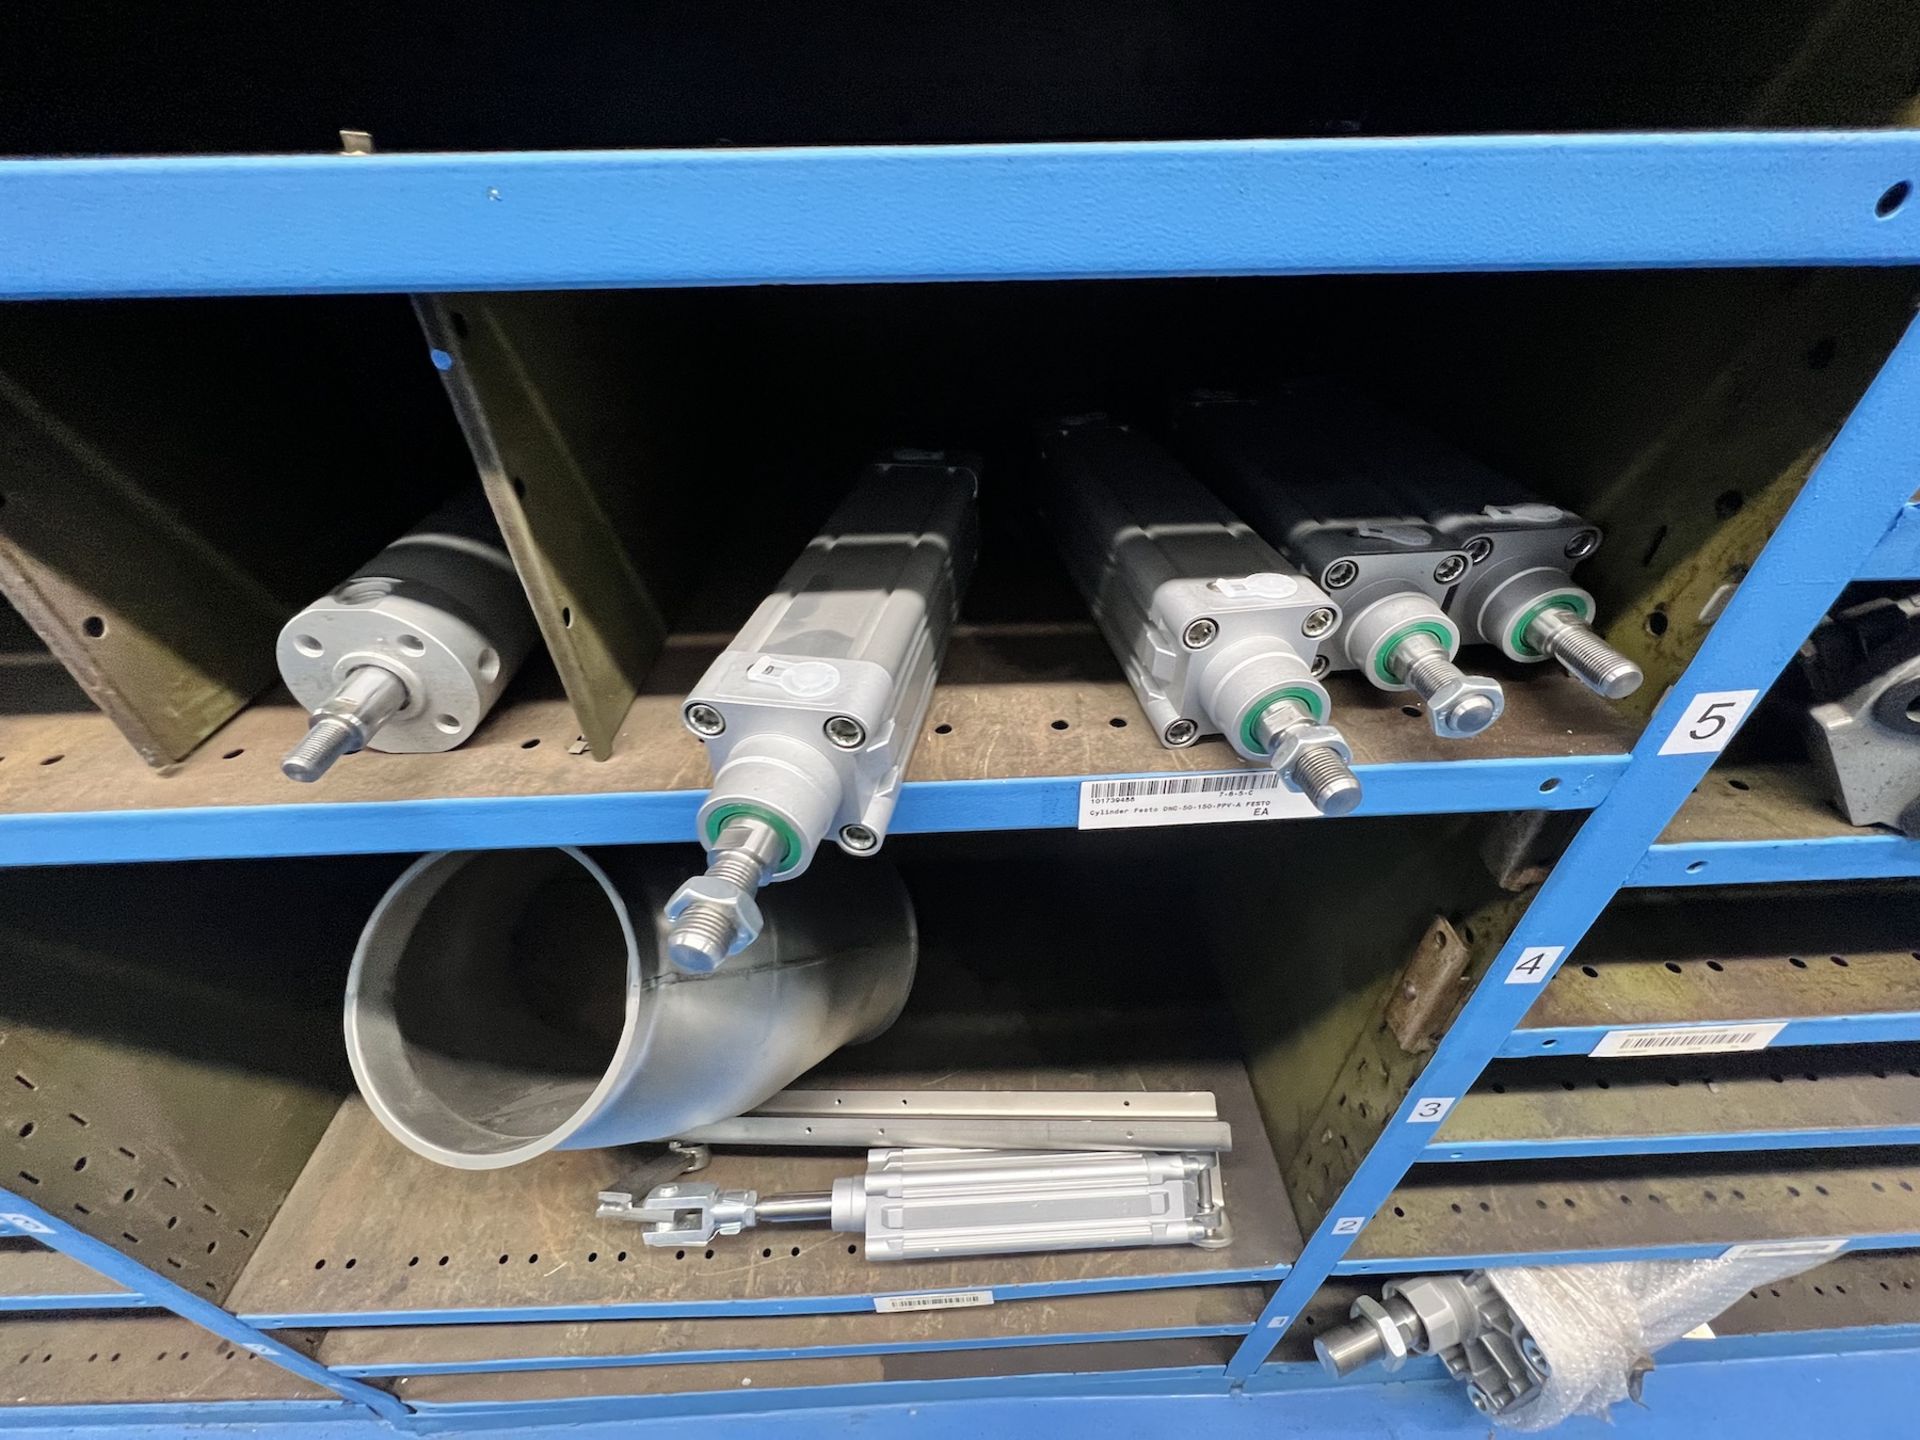 LOT OF ASSORTED MRO AND SPARES, INCLUDES CYLINDERS, VALVES, PNEUMATICS - Image 5 of 23